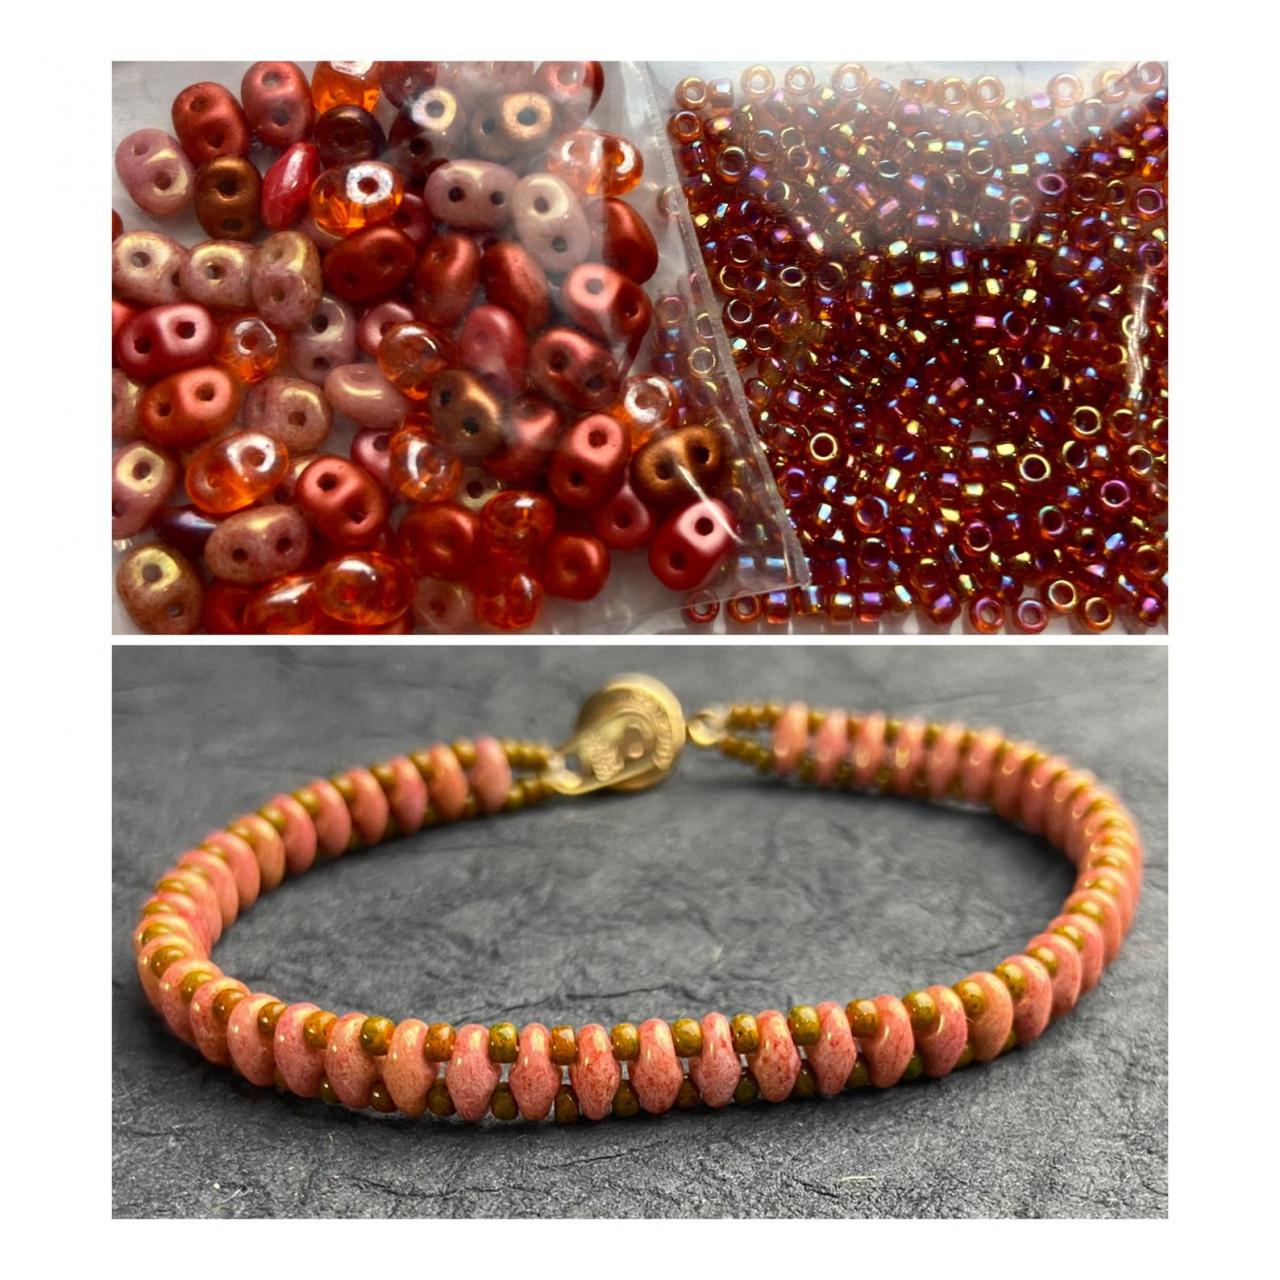 Kit Chili Red Mix Simple SuperDuo Bracelet Easy No Tools Needed Mix DIY Beginner Fun Fall Colors